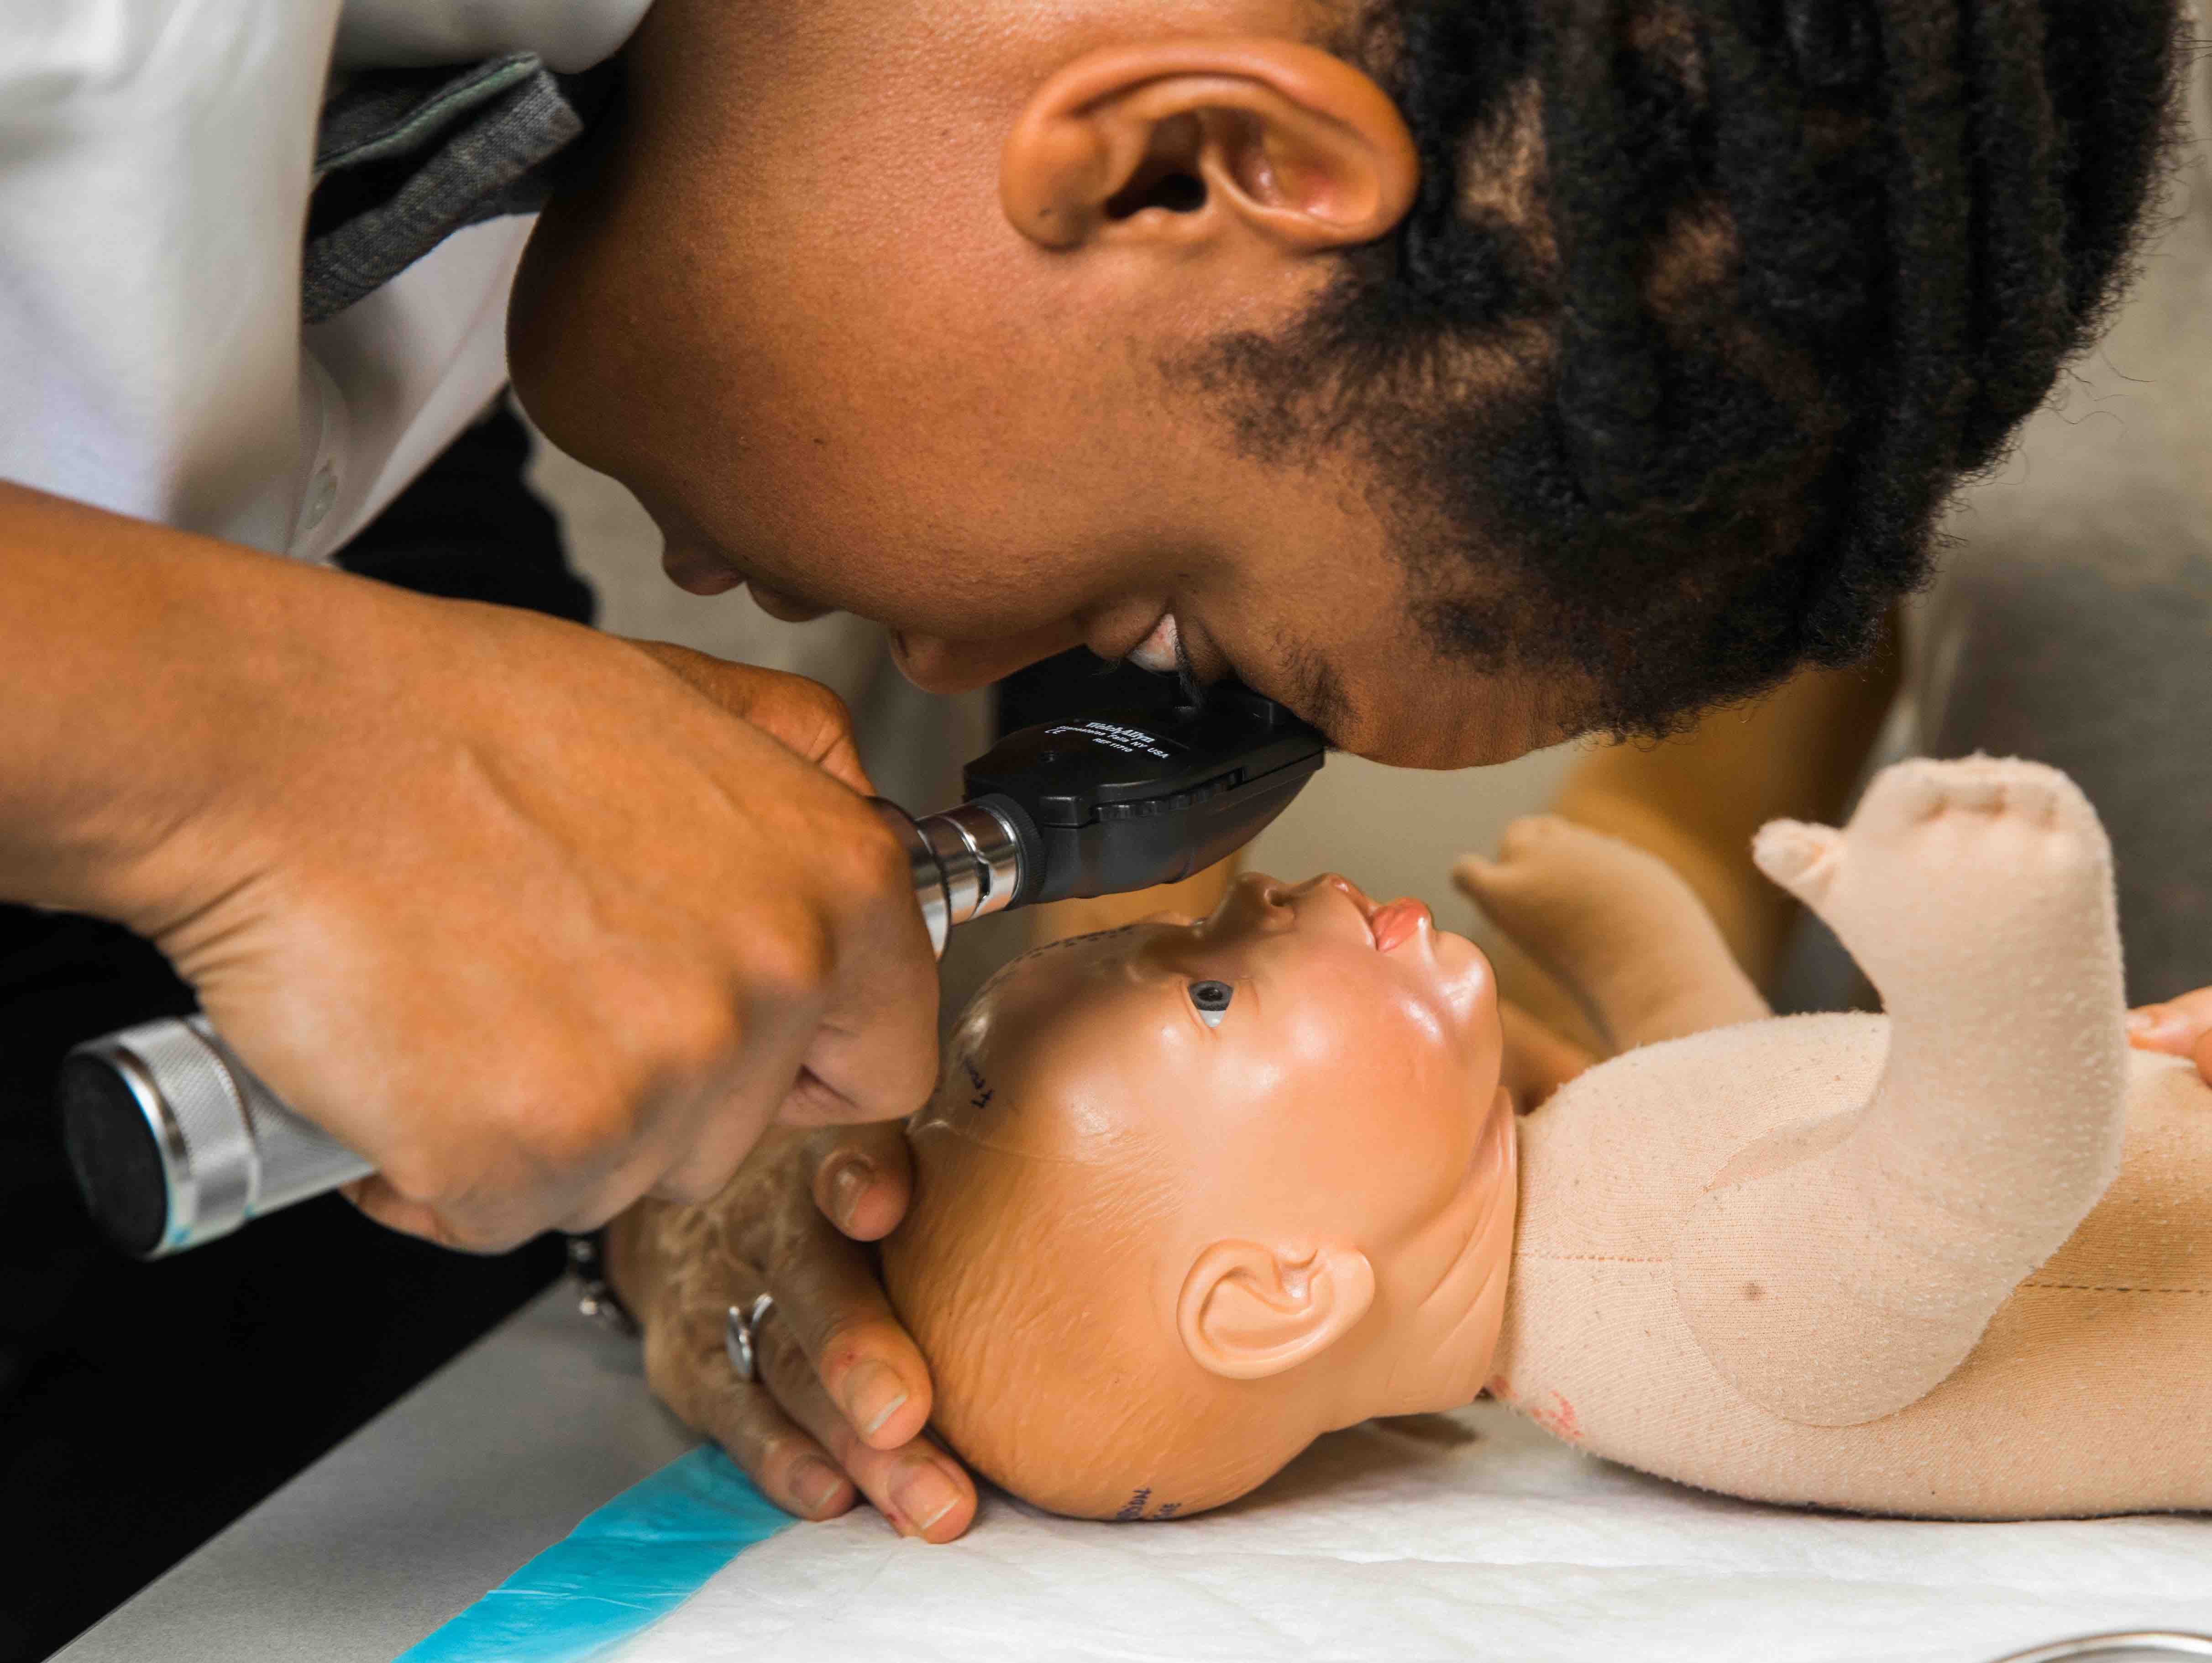 Student examining model baby with medical instrument